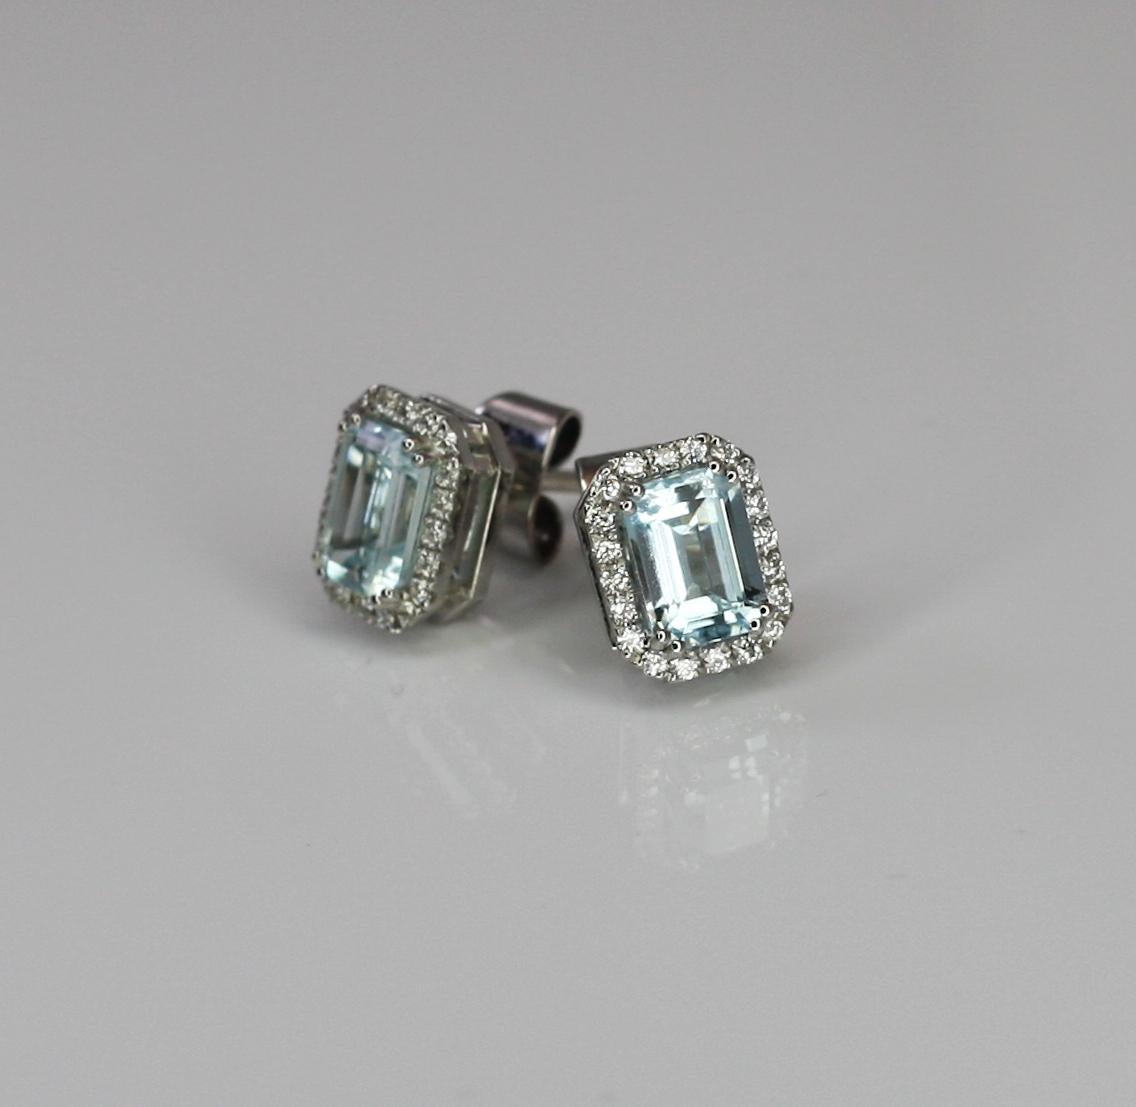 These S.Georgios earrings are 18 Karat white gold and all handmade. The earrings are decorated with Brilliant cut Diamonds, the total weight of 0.26 Carat and Emerald cut Aquamarine center in total 1.80 Carat weight. Earrings can be also ordered in